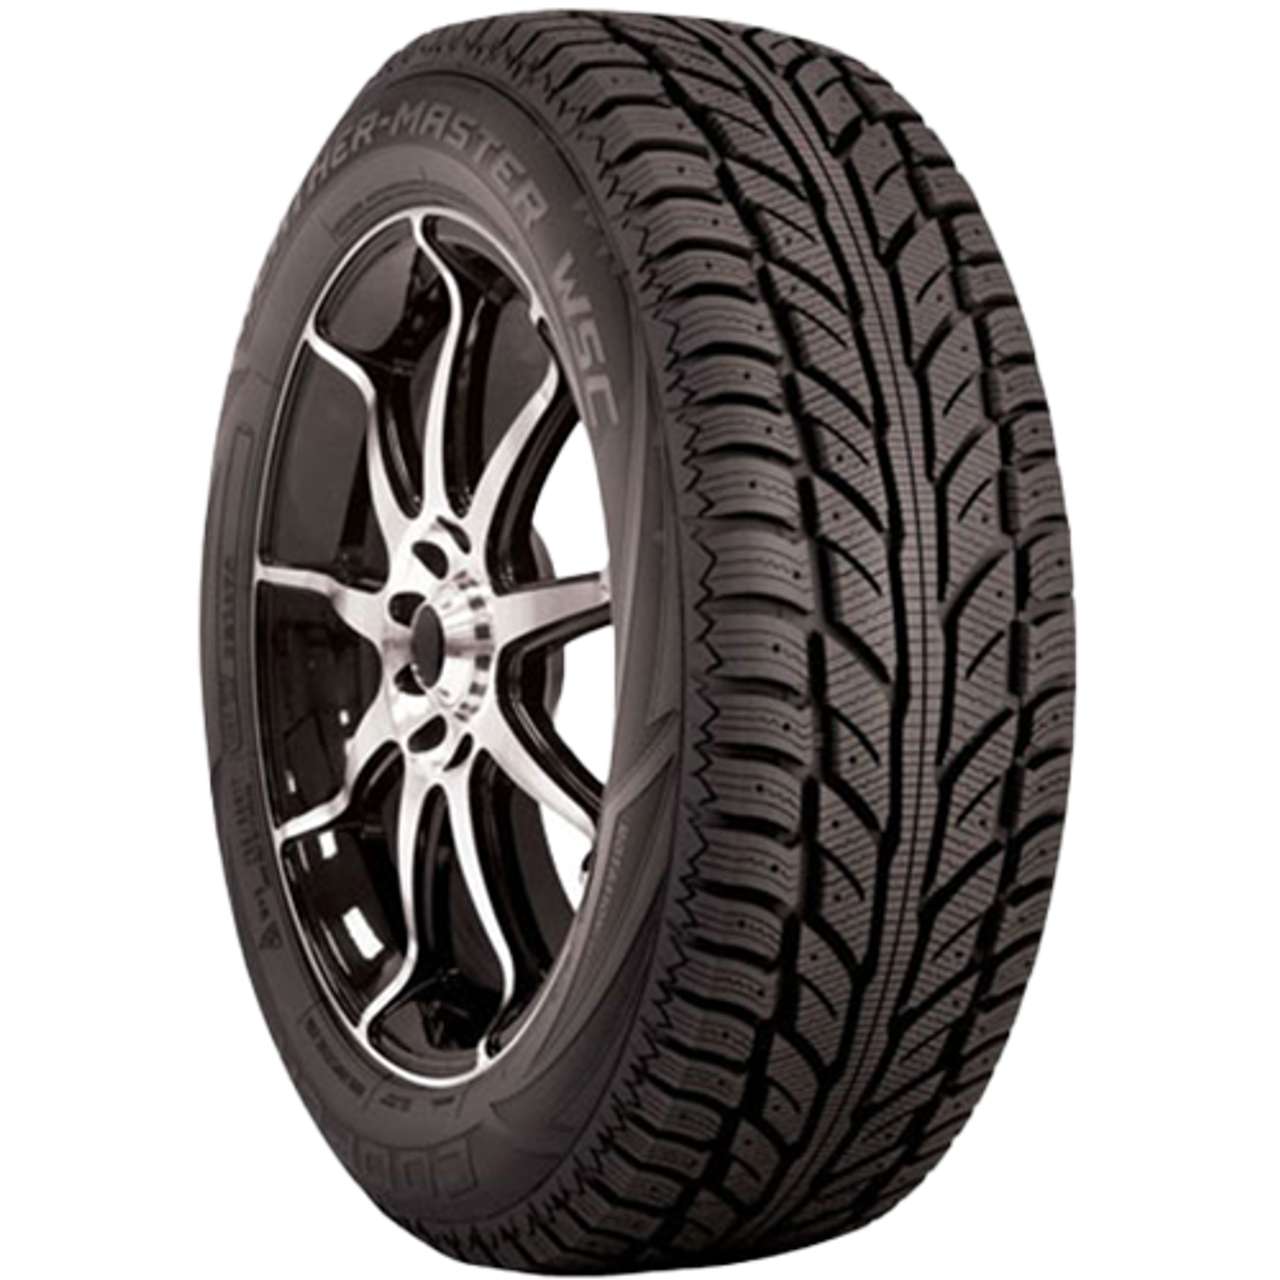 COOPER WEATHERMASTER WSC 195/65R15 91T STUDDABLE BSW